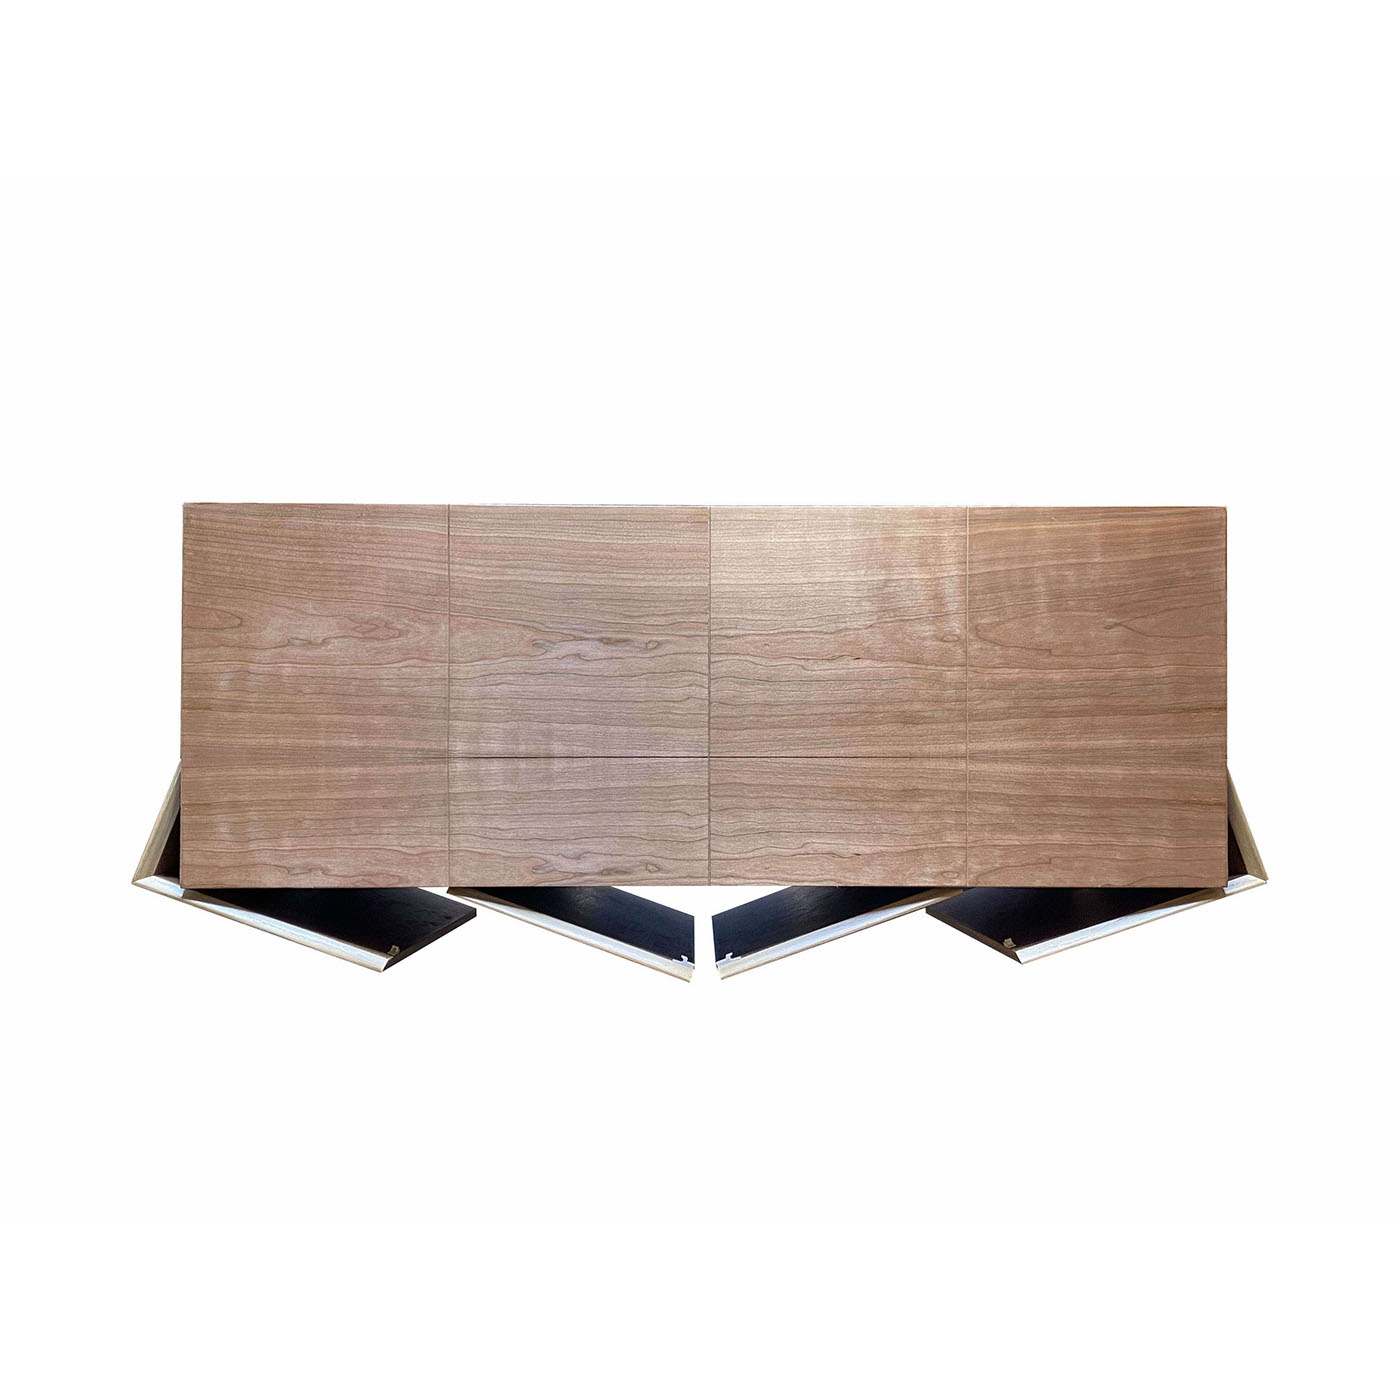 Md2 4-Door Striped Sideboard by Meccani Studio - Alternative view 3